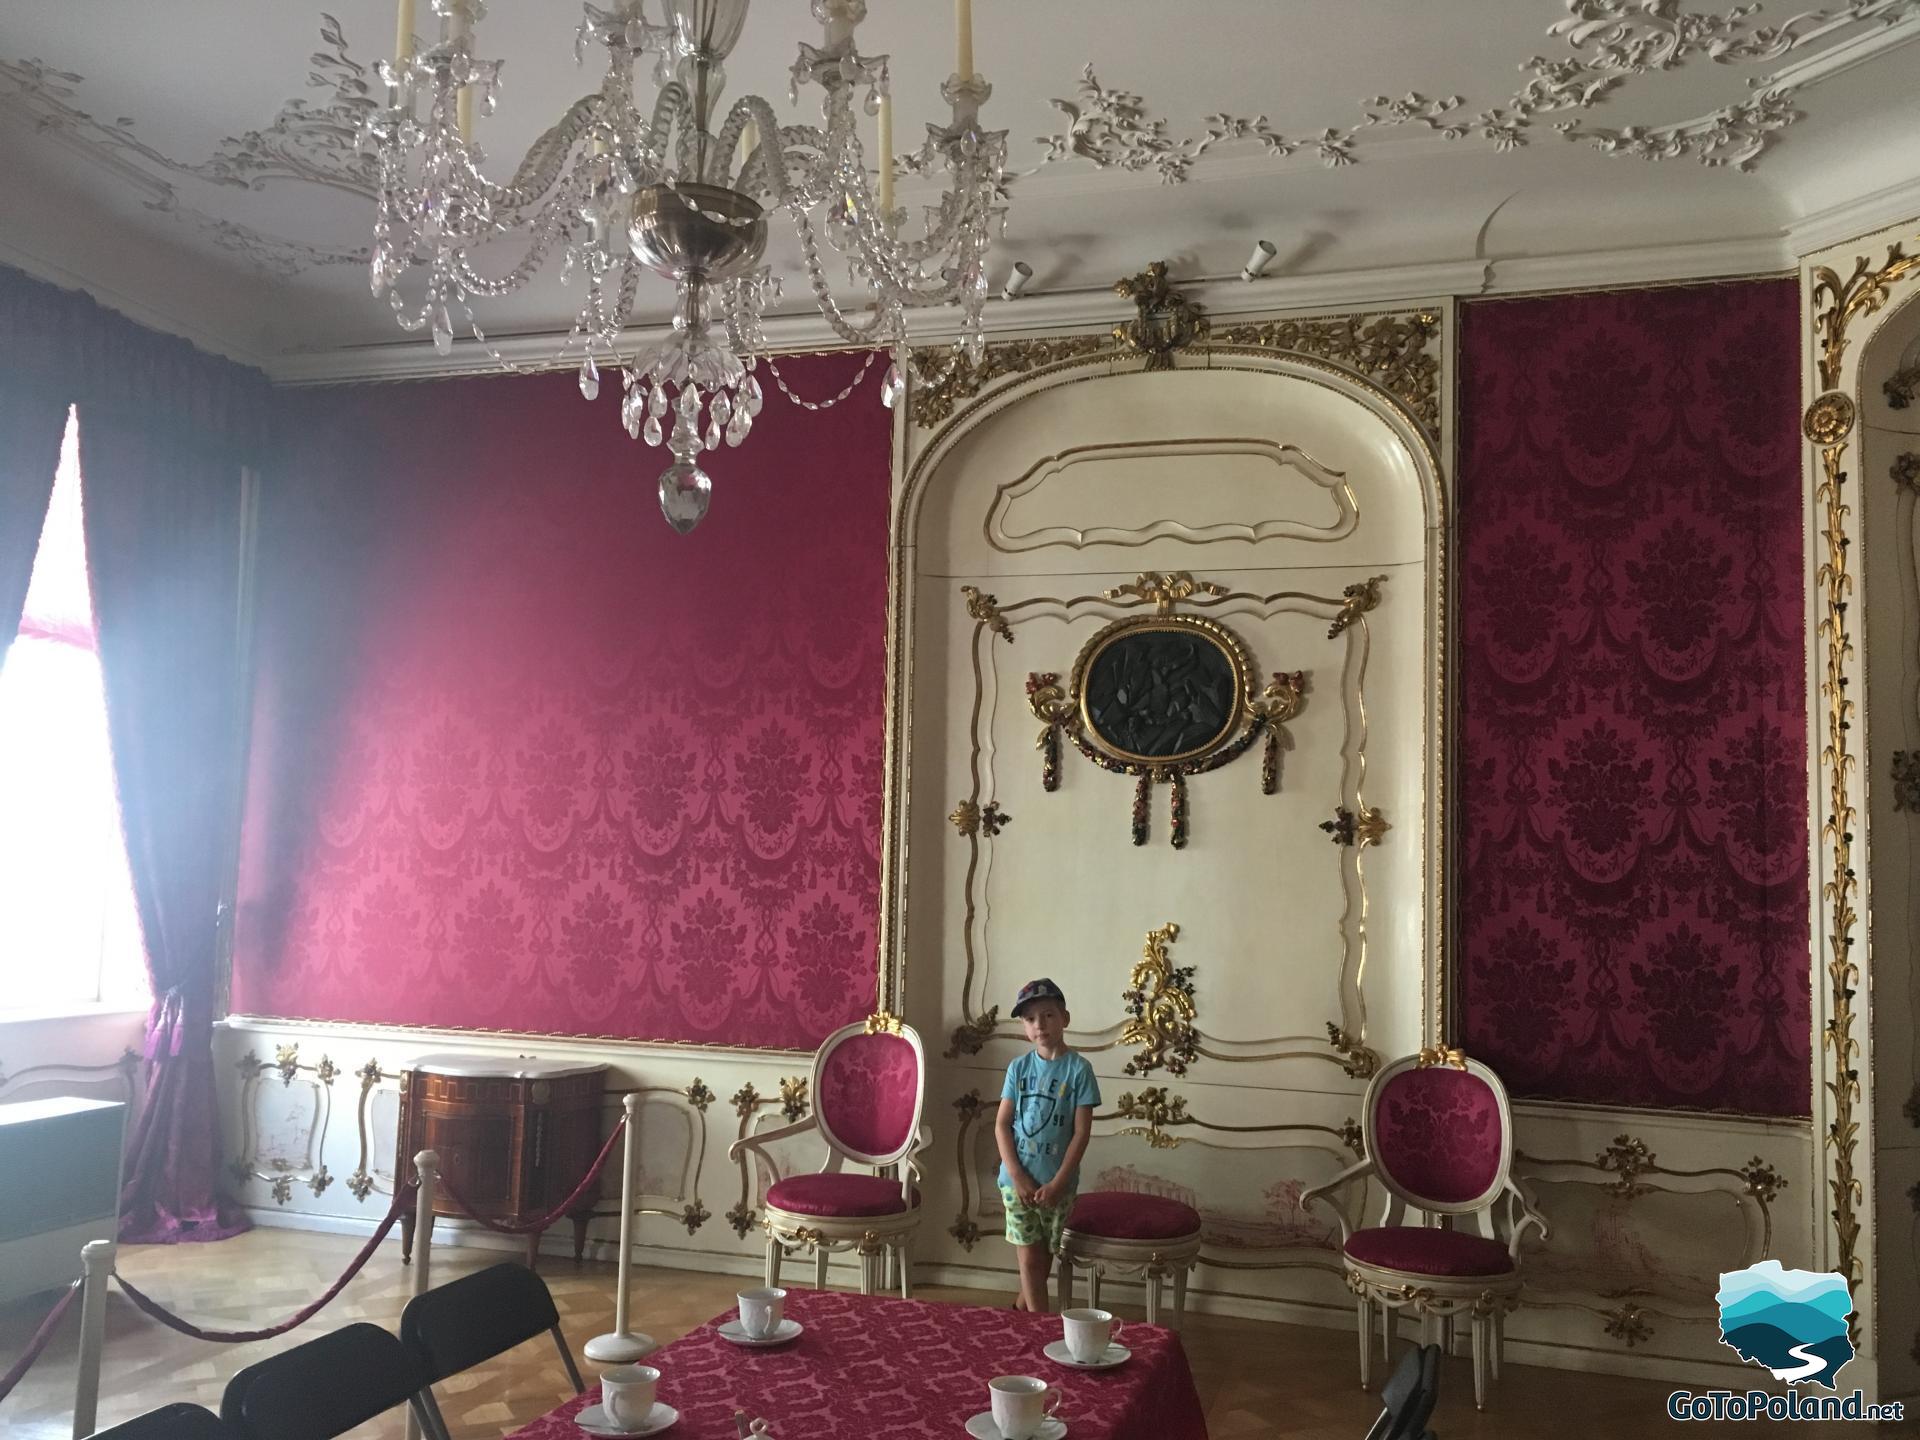 a boy is standing in a room, there is maroon fabric or wallpaper on the walls, a crystal chandelier hangs, there is also a table covered with a red tablecloth and chairs with upholstery in the same color